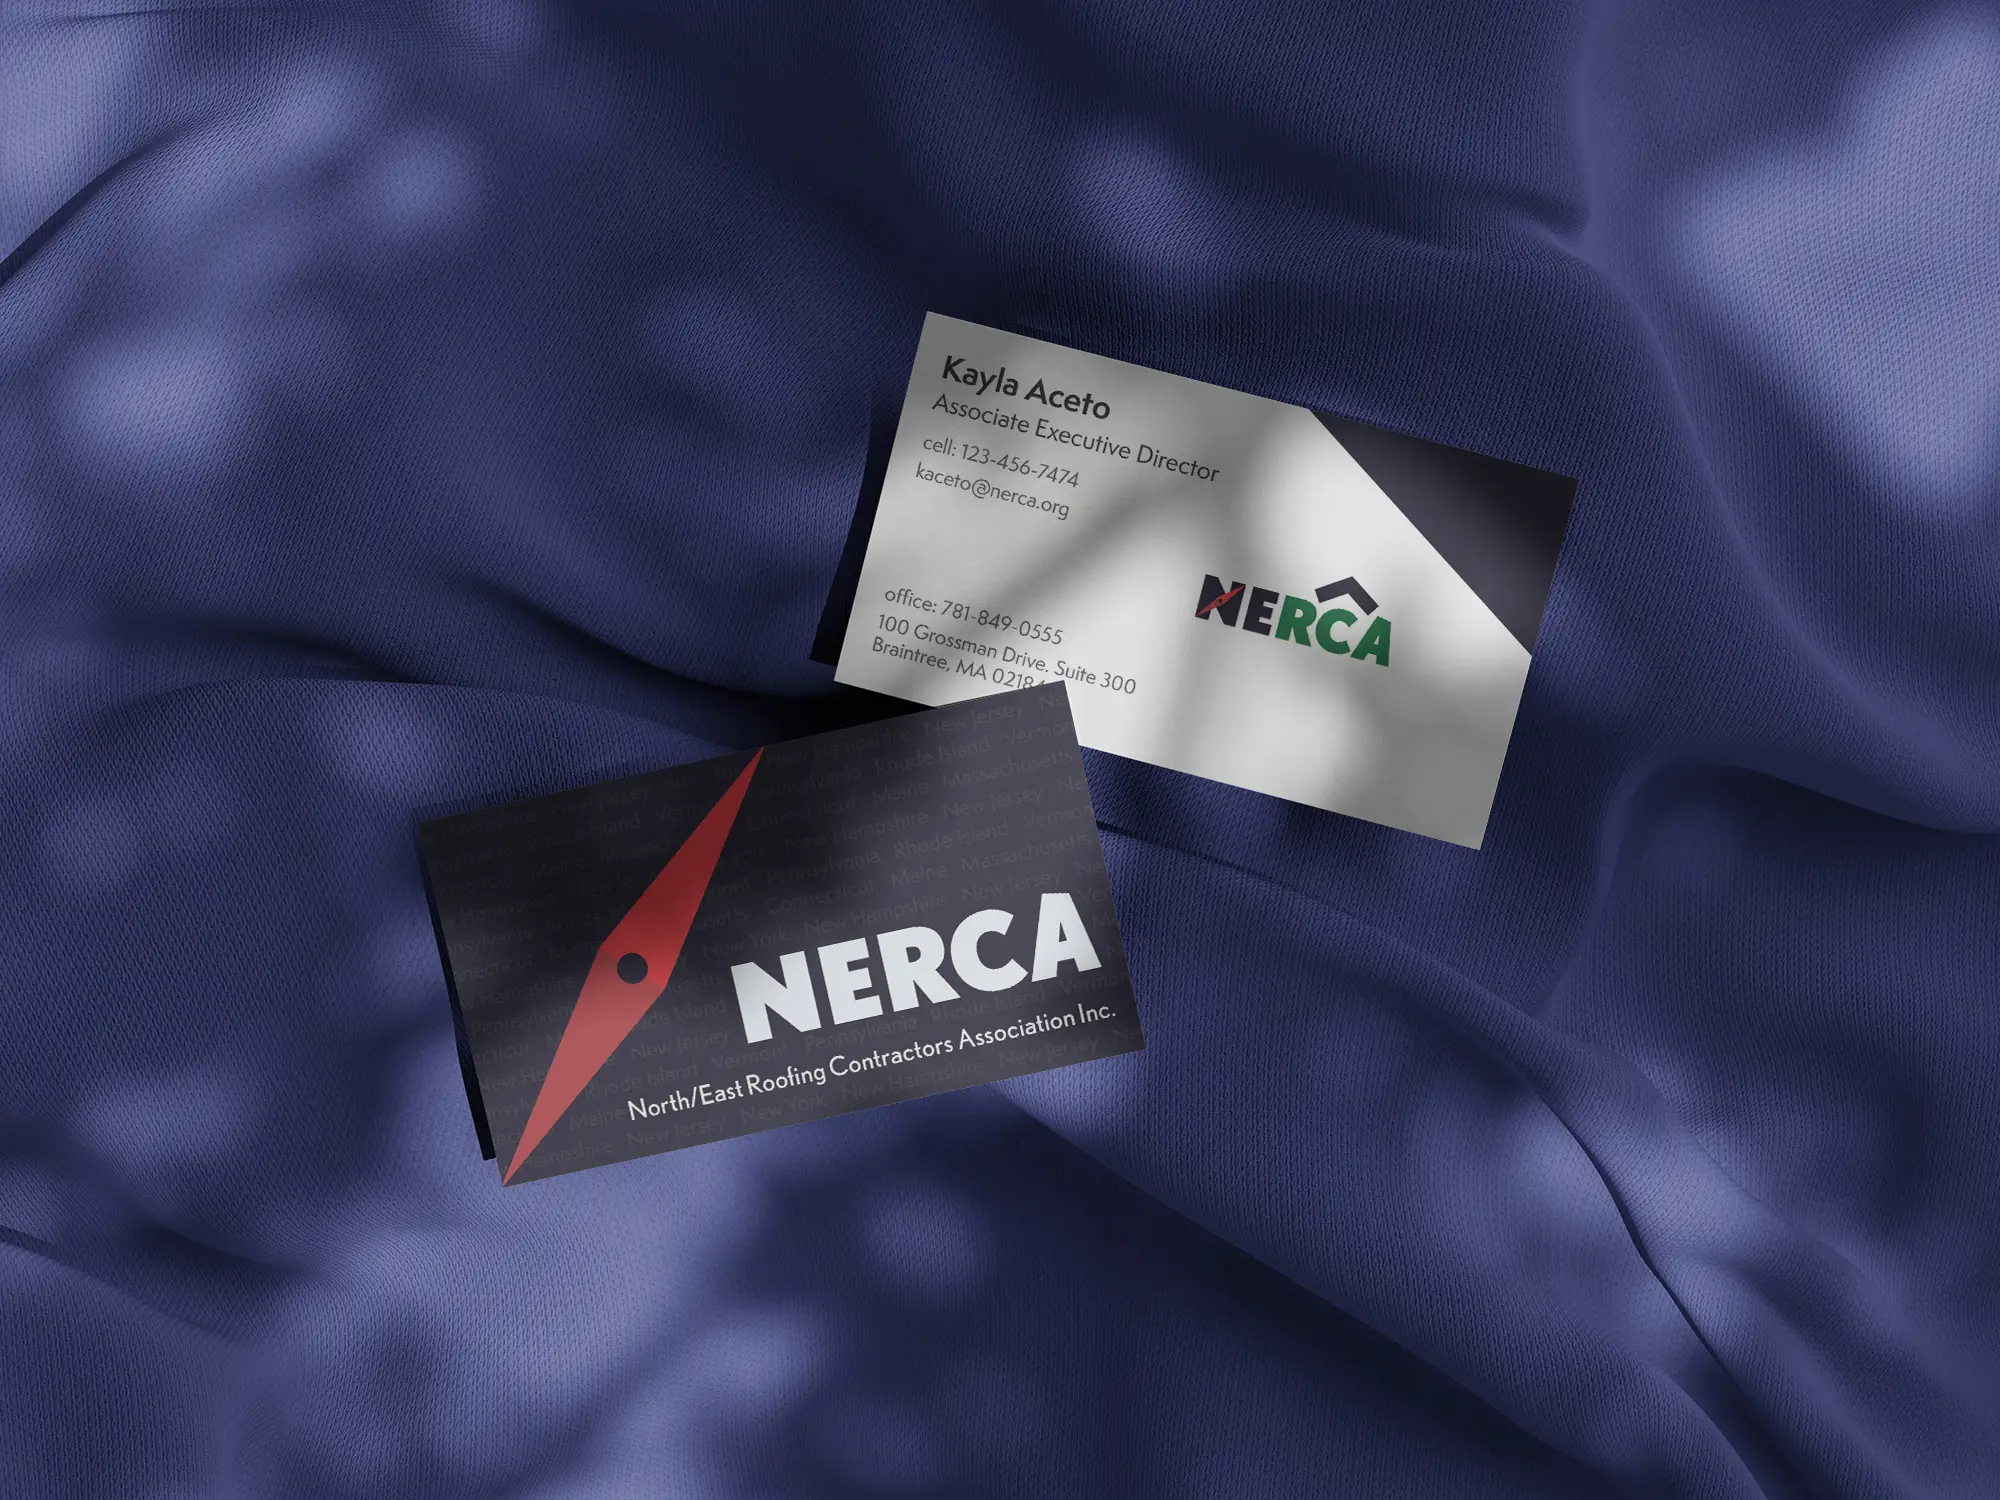 North/East Roofing Contractors Association Business Card On Fabric Mockup